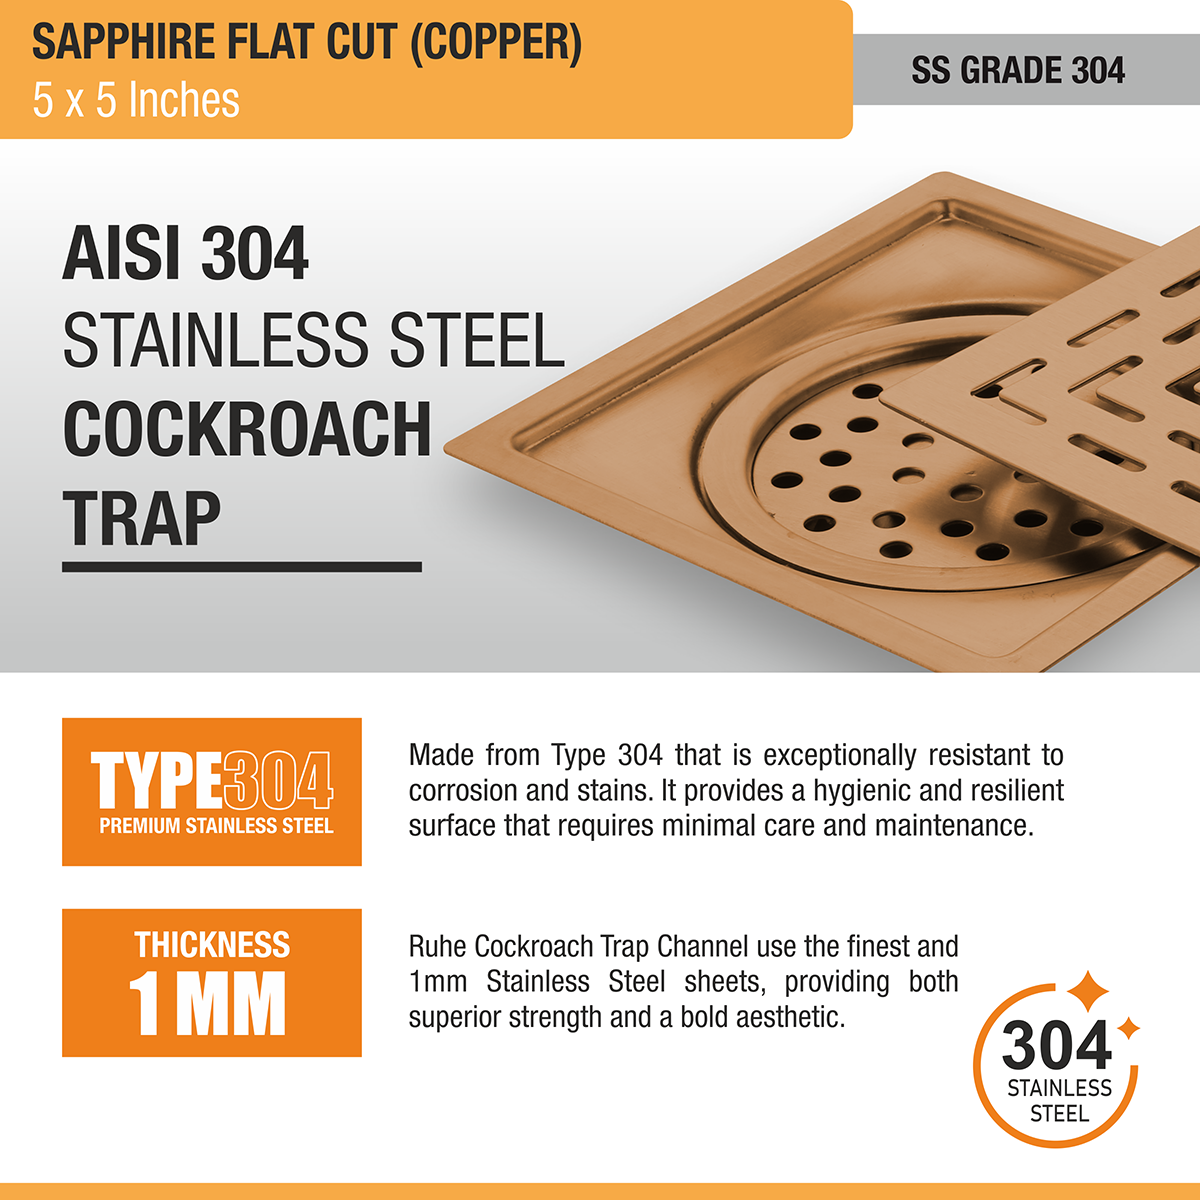 Sapphire Square Flat Cut Floor Drain in Antique Copper PVD Coating (5 x 5 Inches) stainless steel